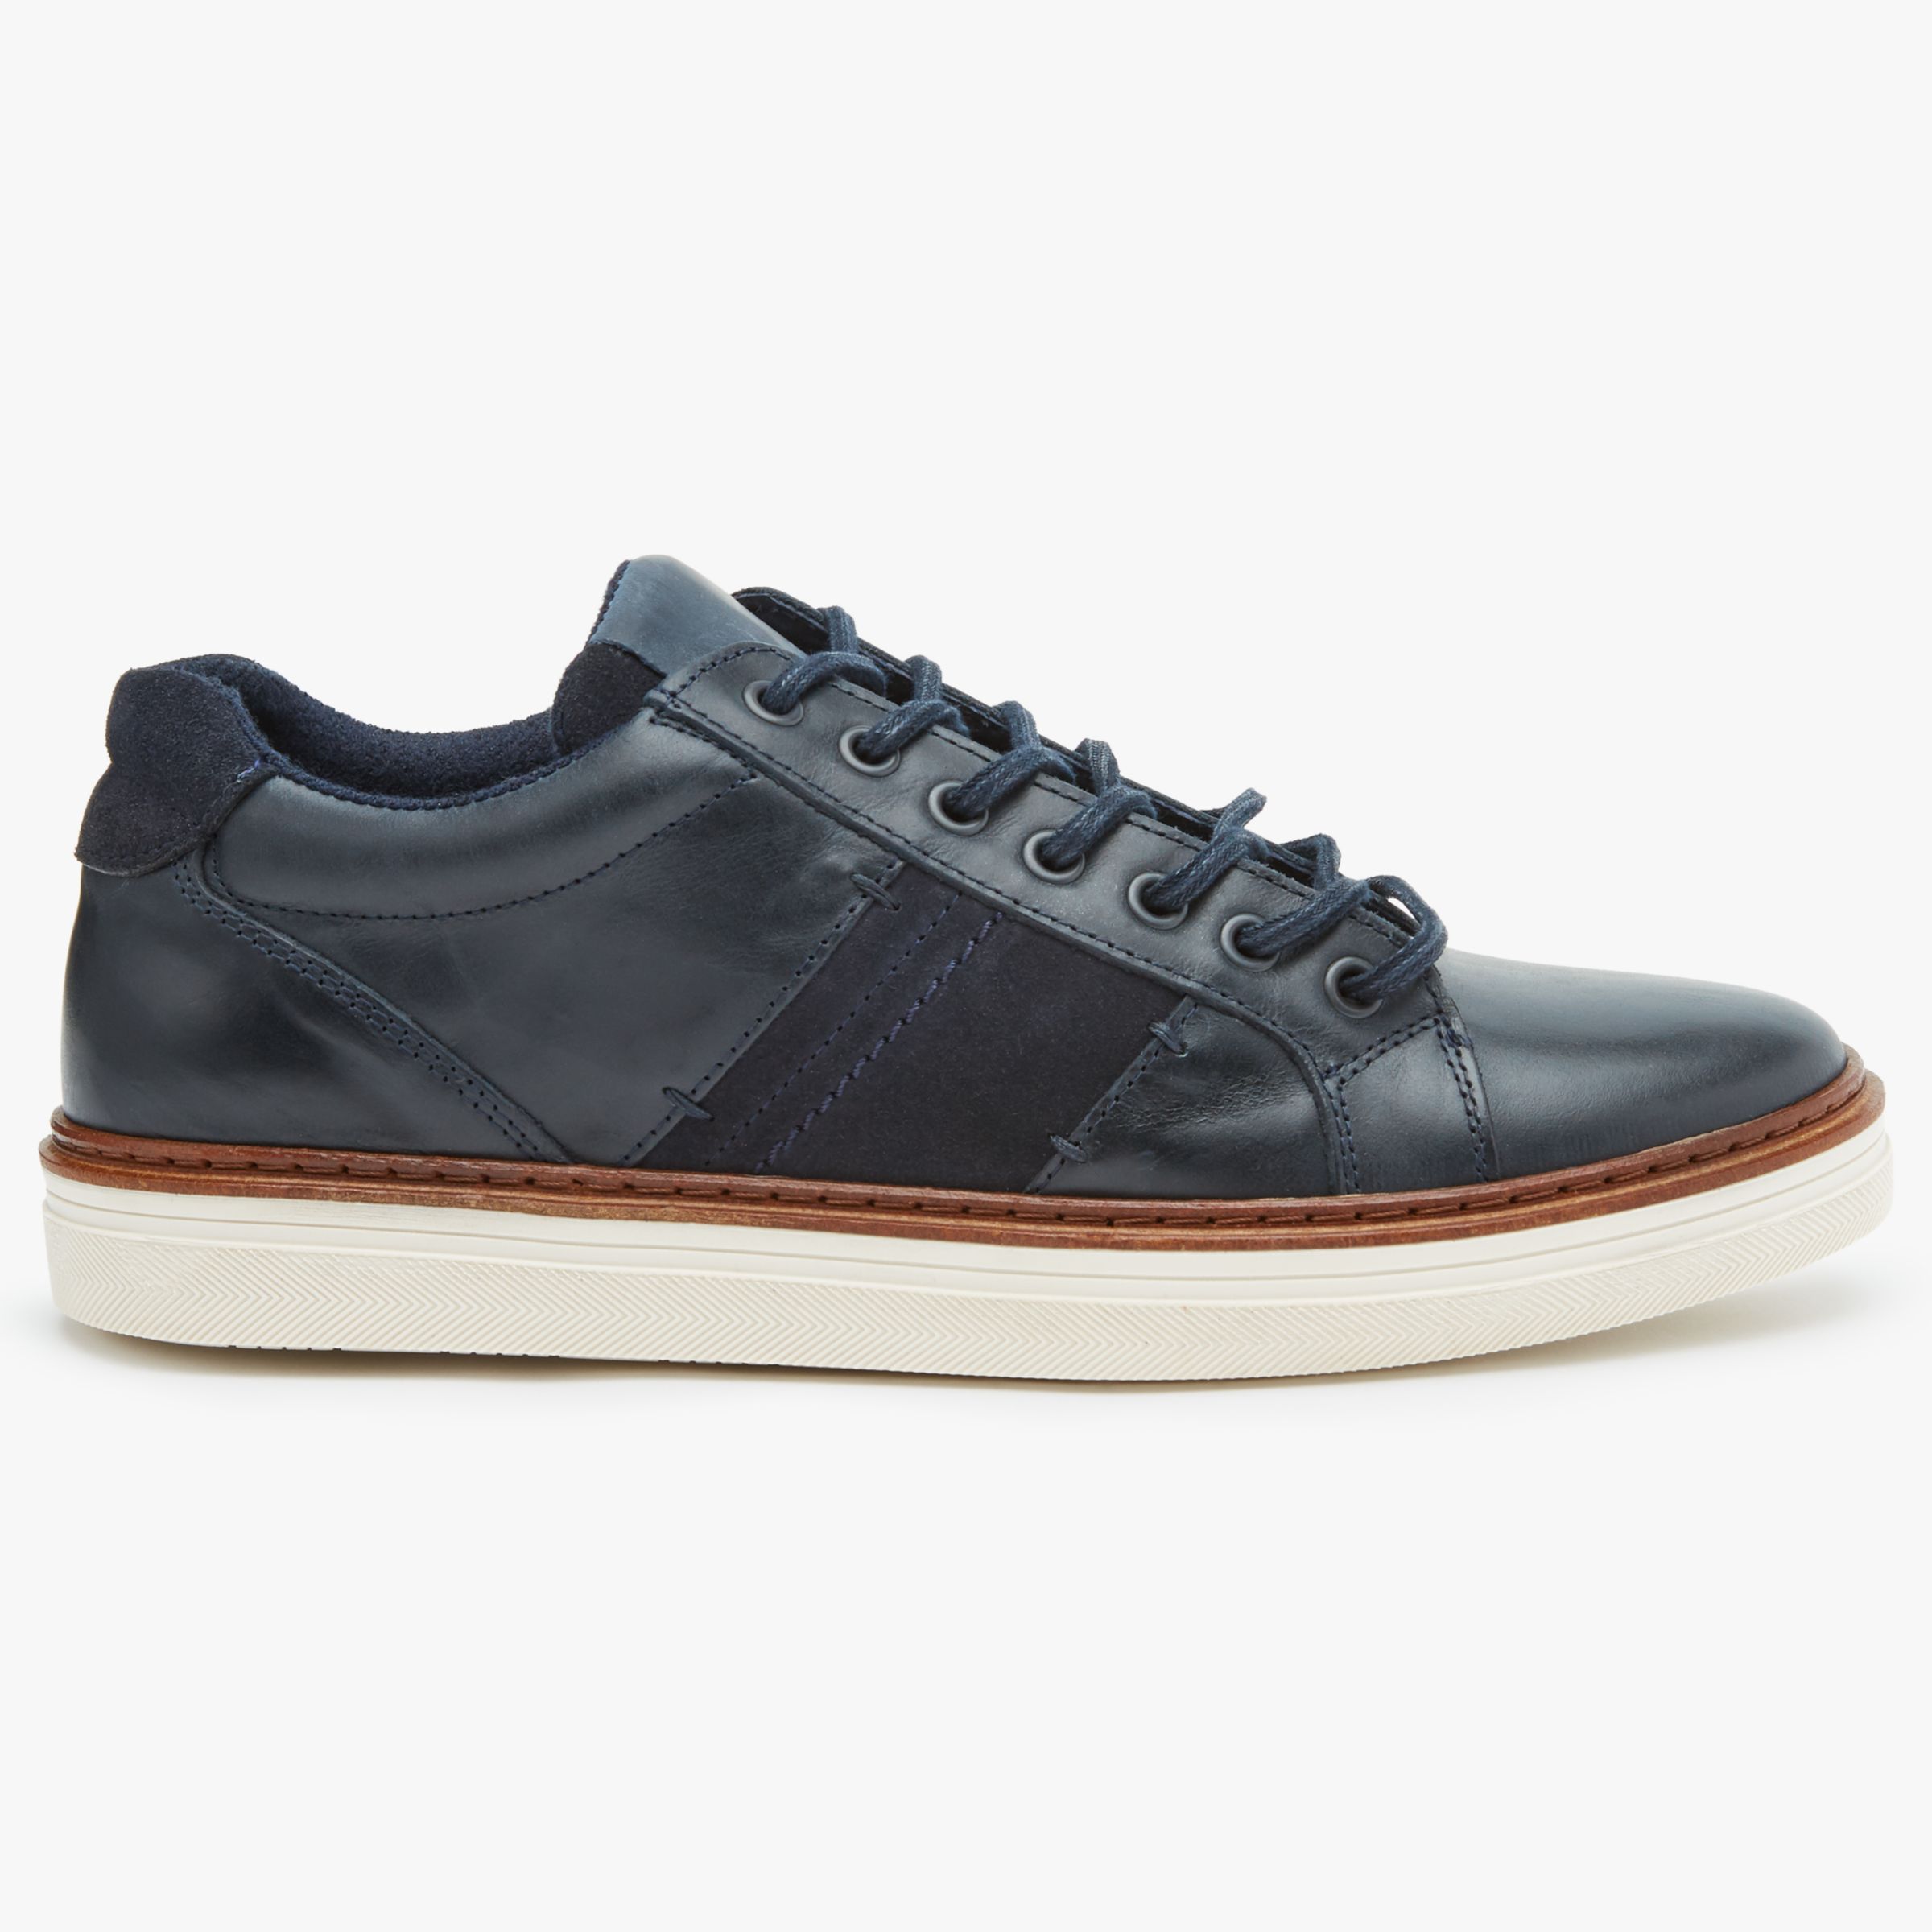 John Lewis & Partners Stamford Cupsole Leather Trainers